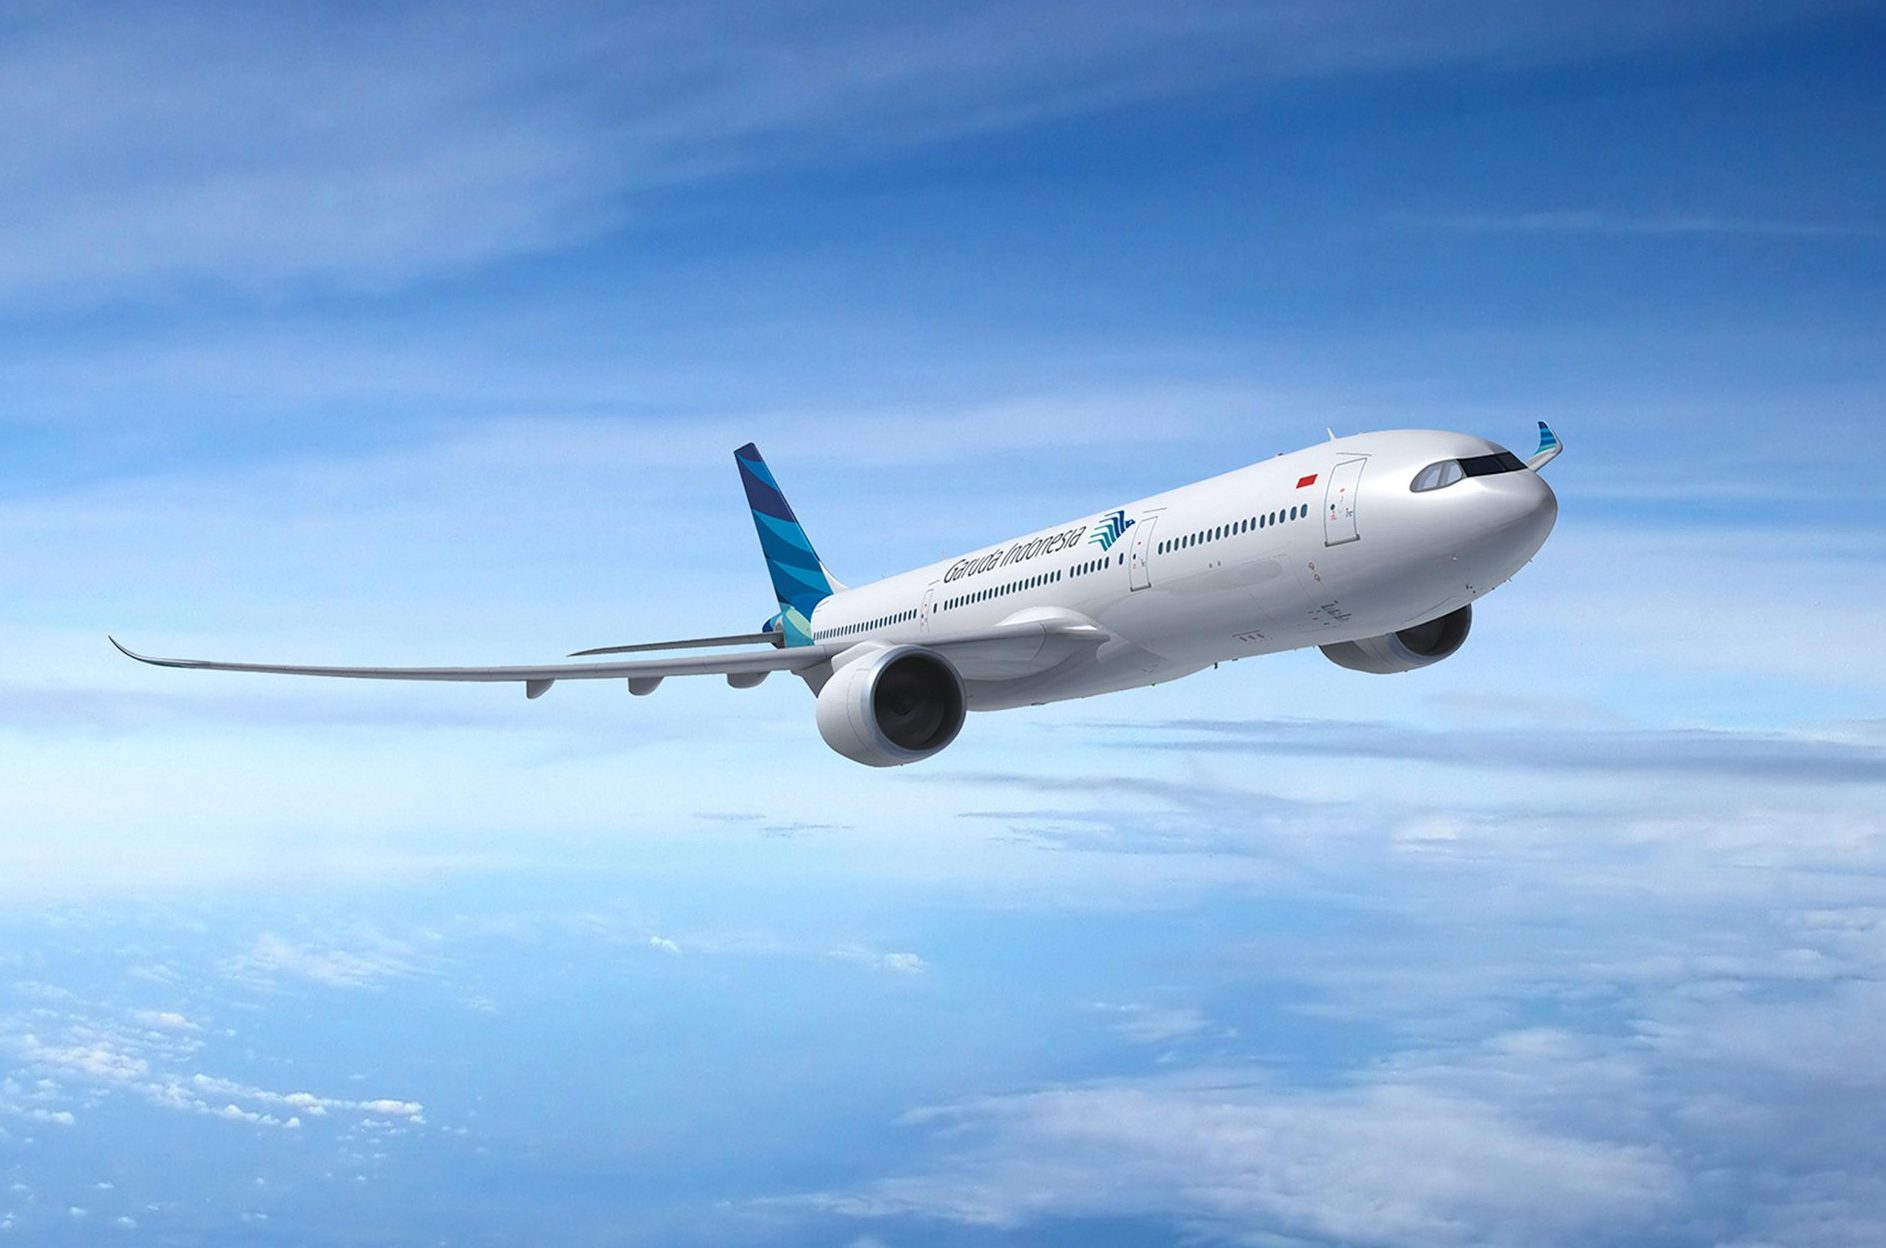 Singapore Airshow: Thales Signs with Garuda Indonesia and Airbus